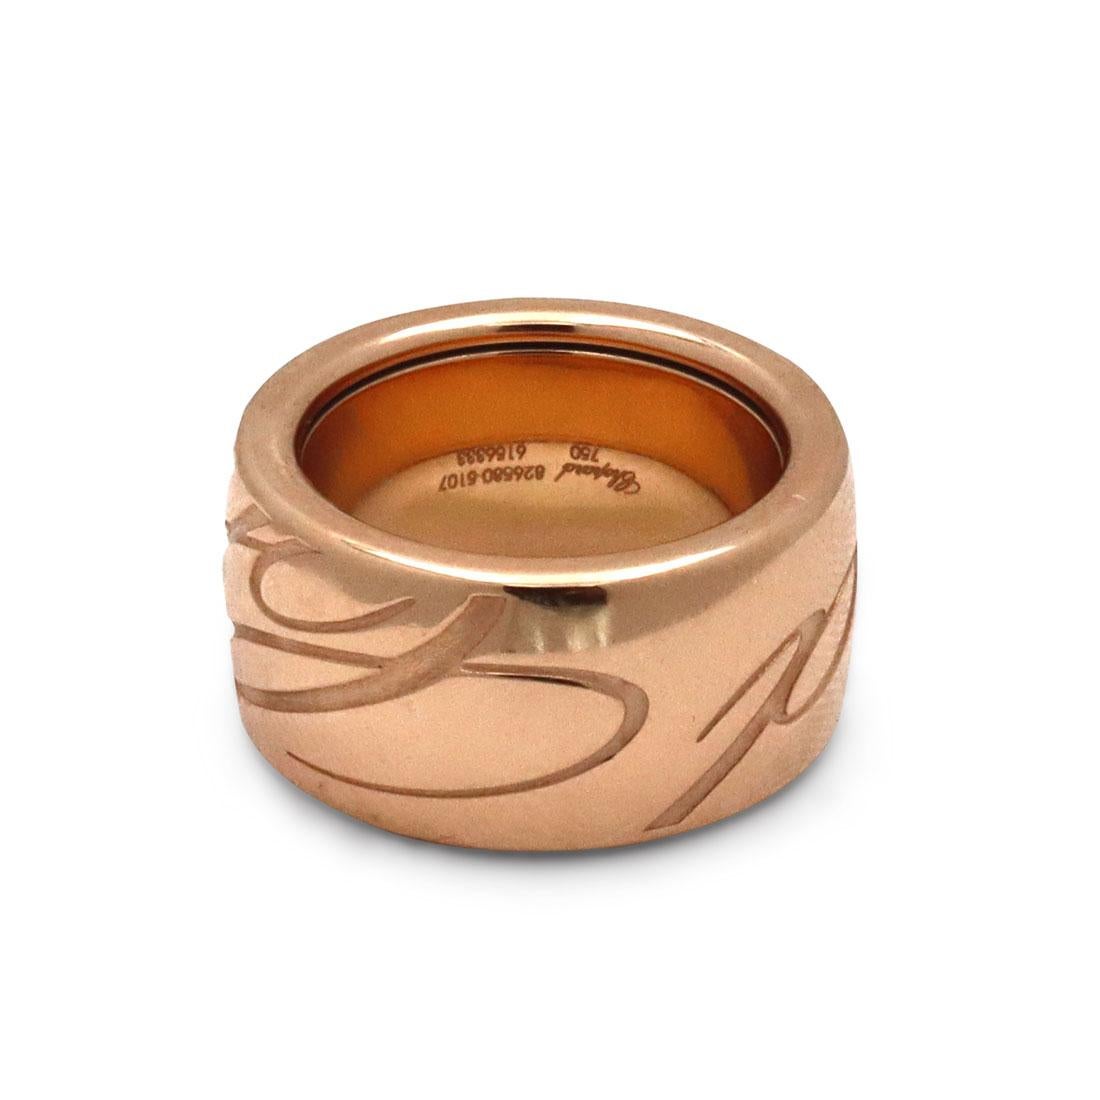 Authentic Chopard ring from the 'Chopardissimo' collection crafted in 18 karat rose gold.  The bold curves of the ring are highlighted by the caligraphy of the Chopard logo.  The ring measures 11mm in width and is a US size 5 1/2.  Signed Chopard,